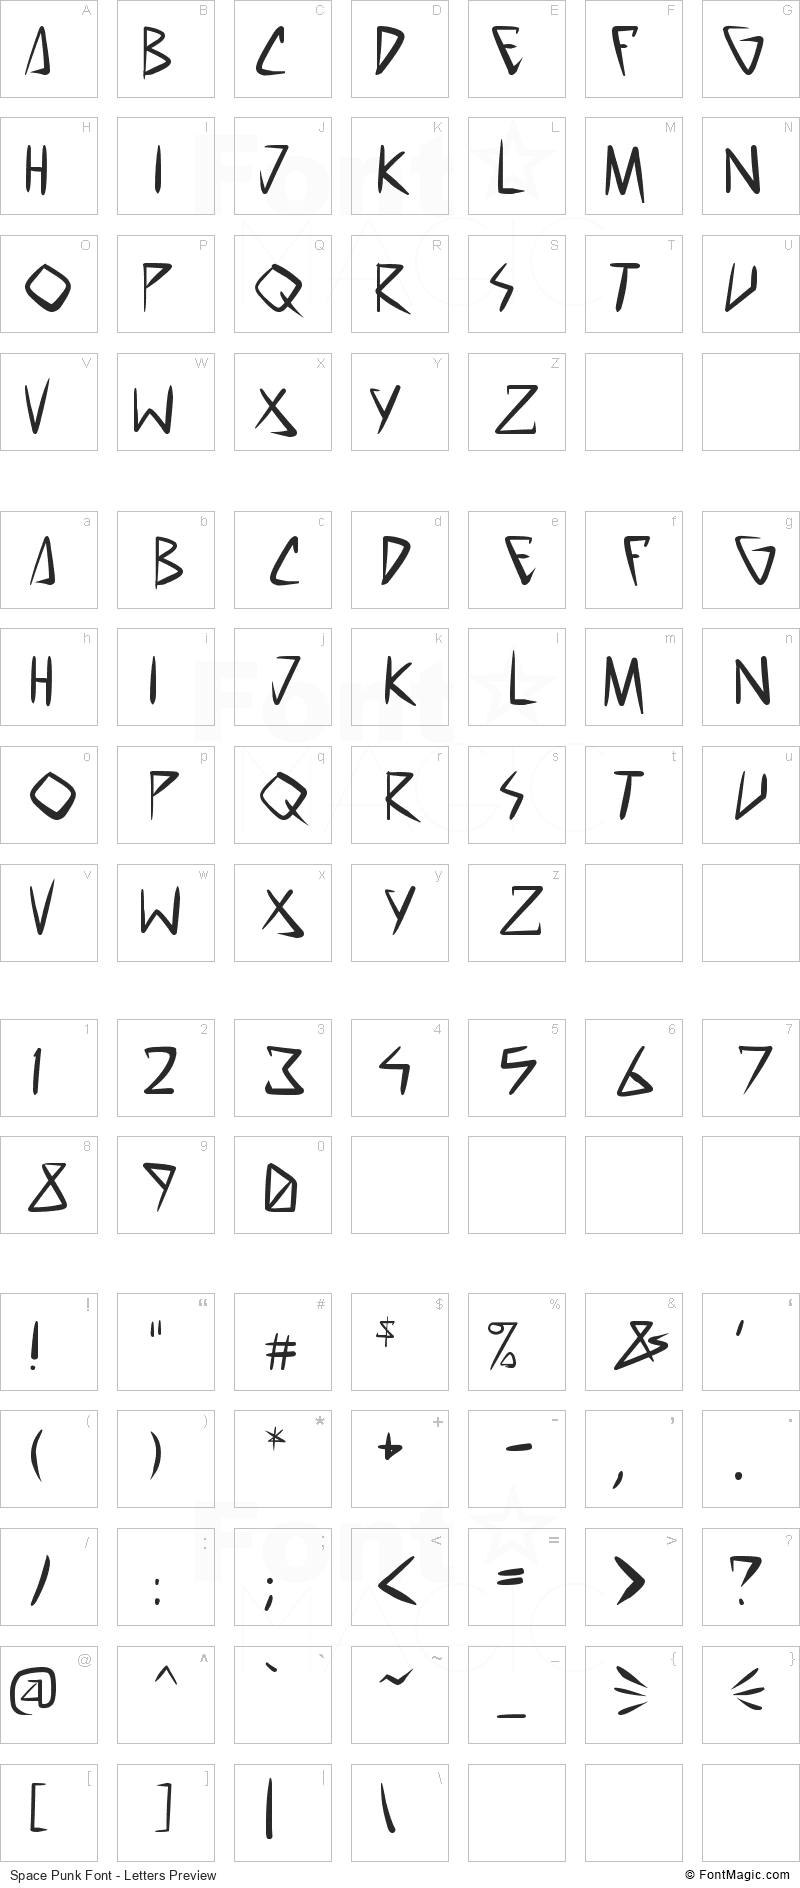 Space Punk Font - All Latters Preview Chart